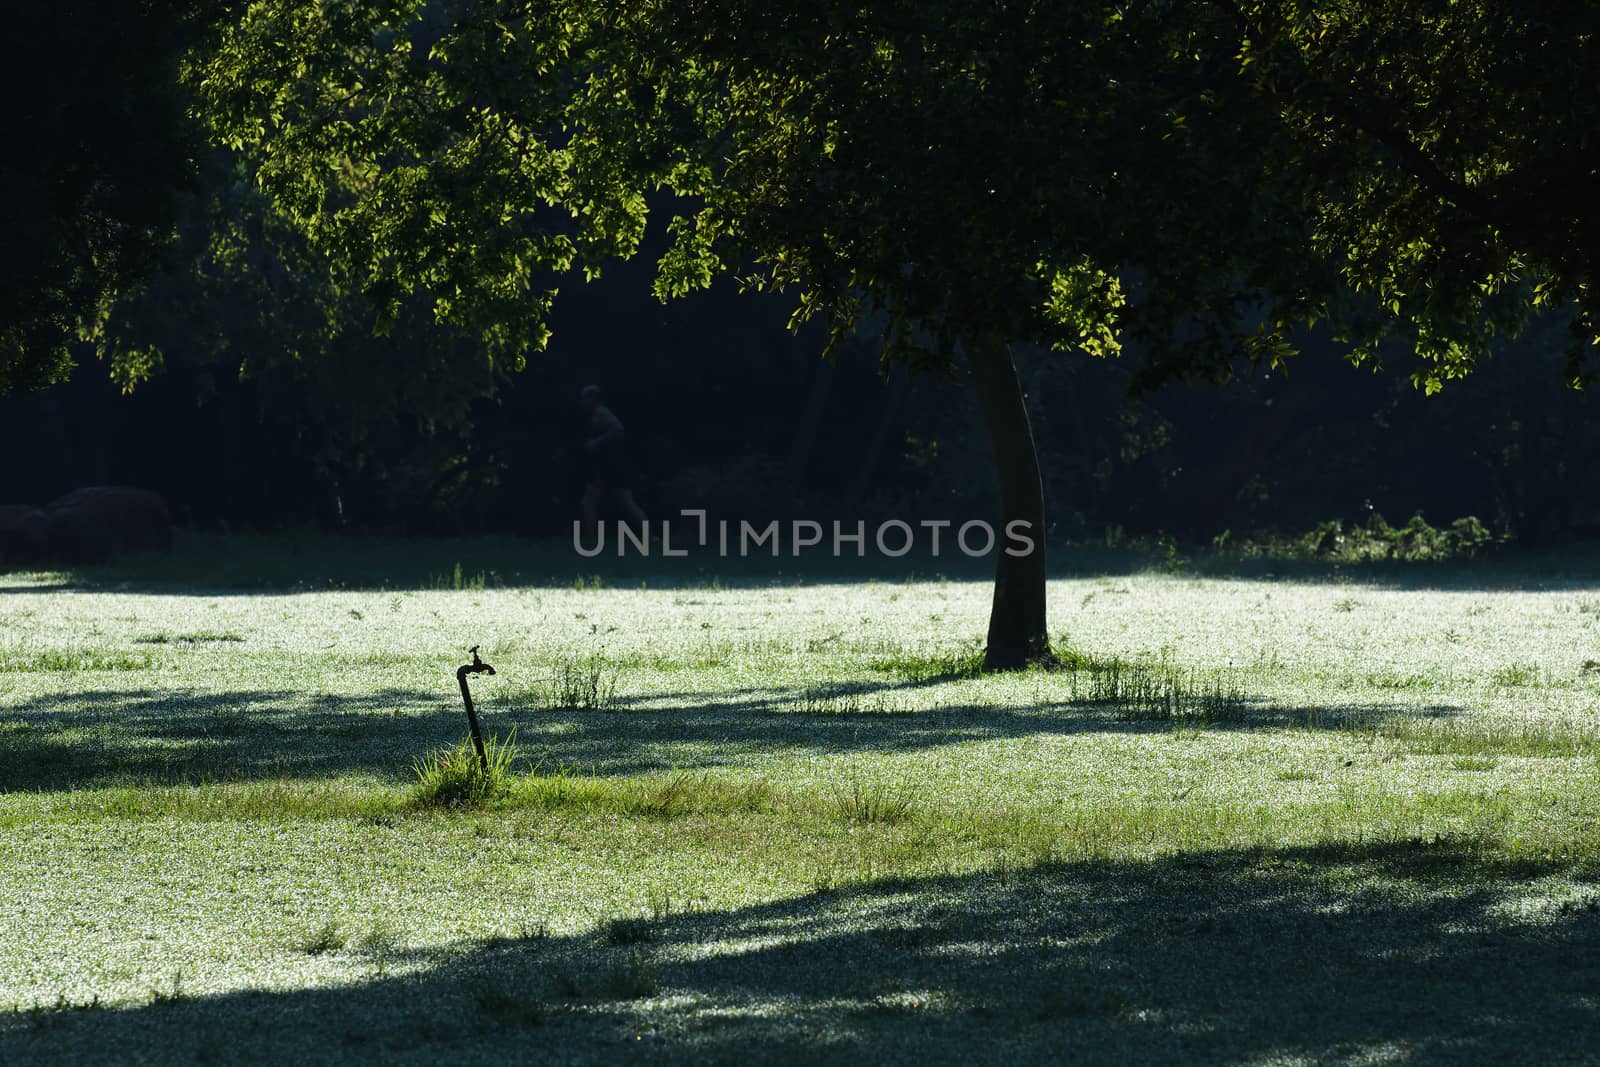 Early morning dew grass in a park with water tap, tree and runner in the background, Pretoria, South Africa